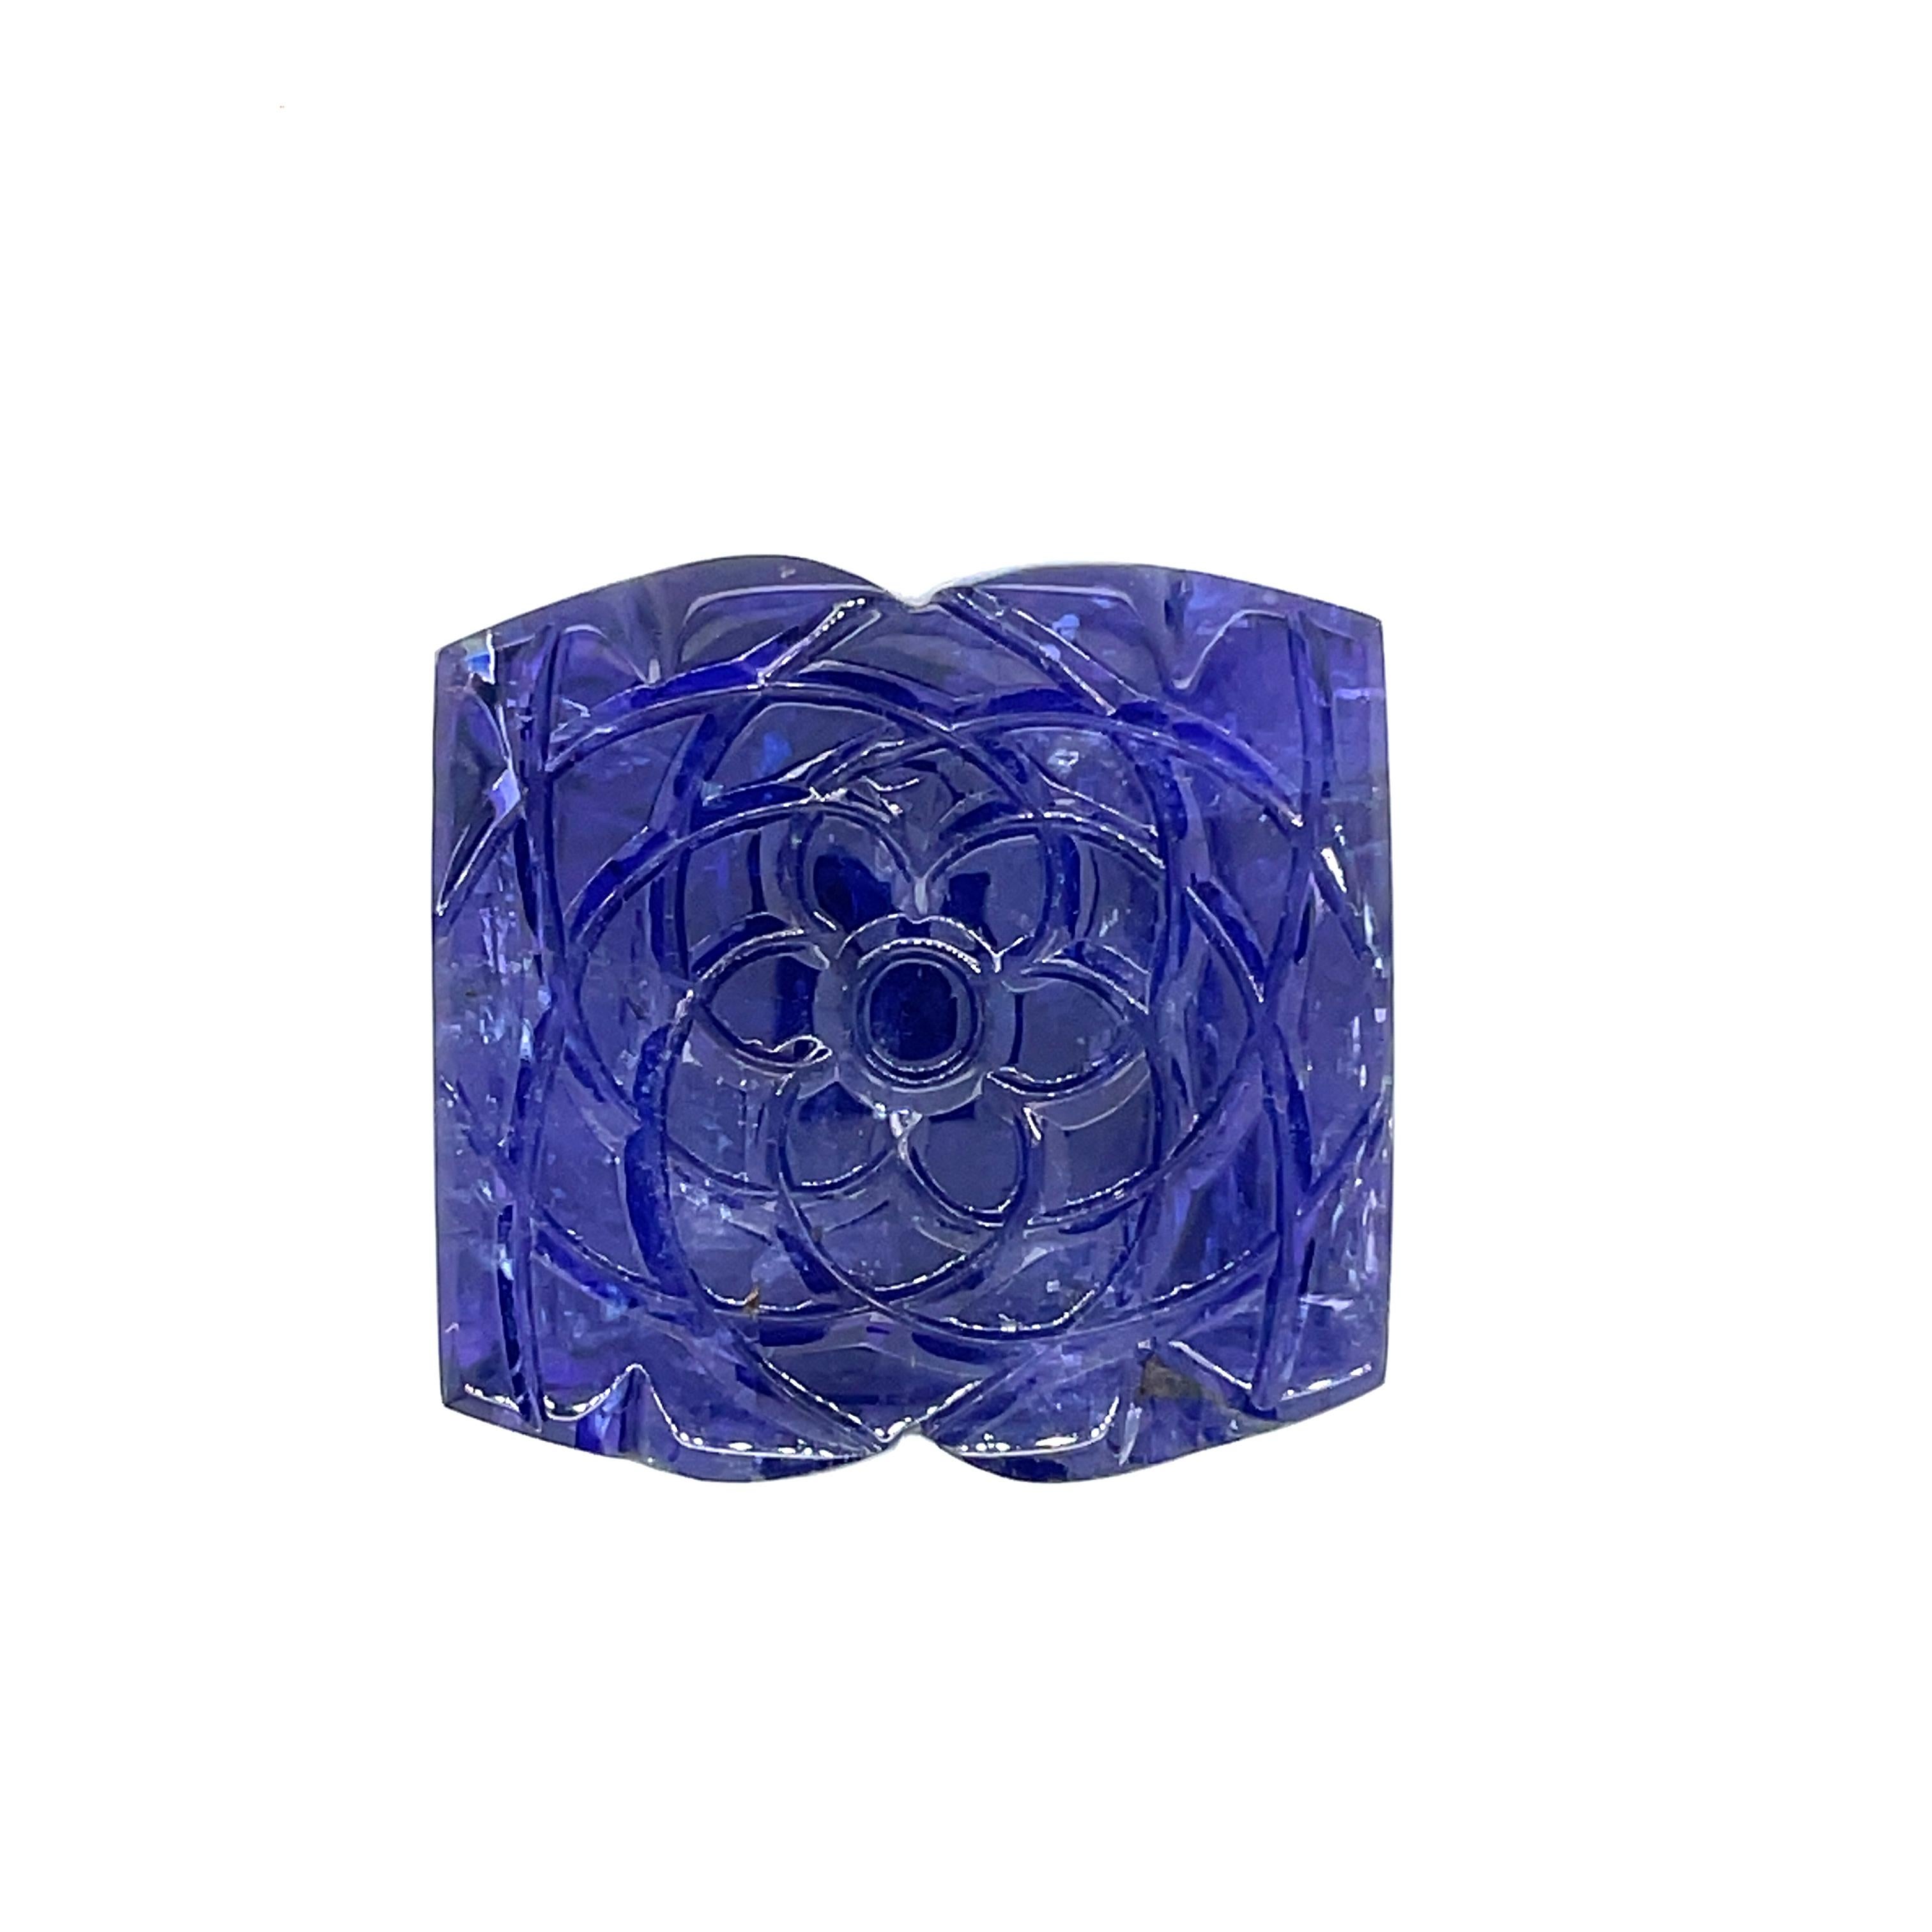 An alluring tanzanite carved flower with delicate petals and an elaborate floral arrangement, weighing an amazing 128.94 carats, conveys timeless elegance. 

This stunning gemstone has carved lines that captivate the eye on its sides.

Whether